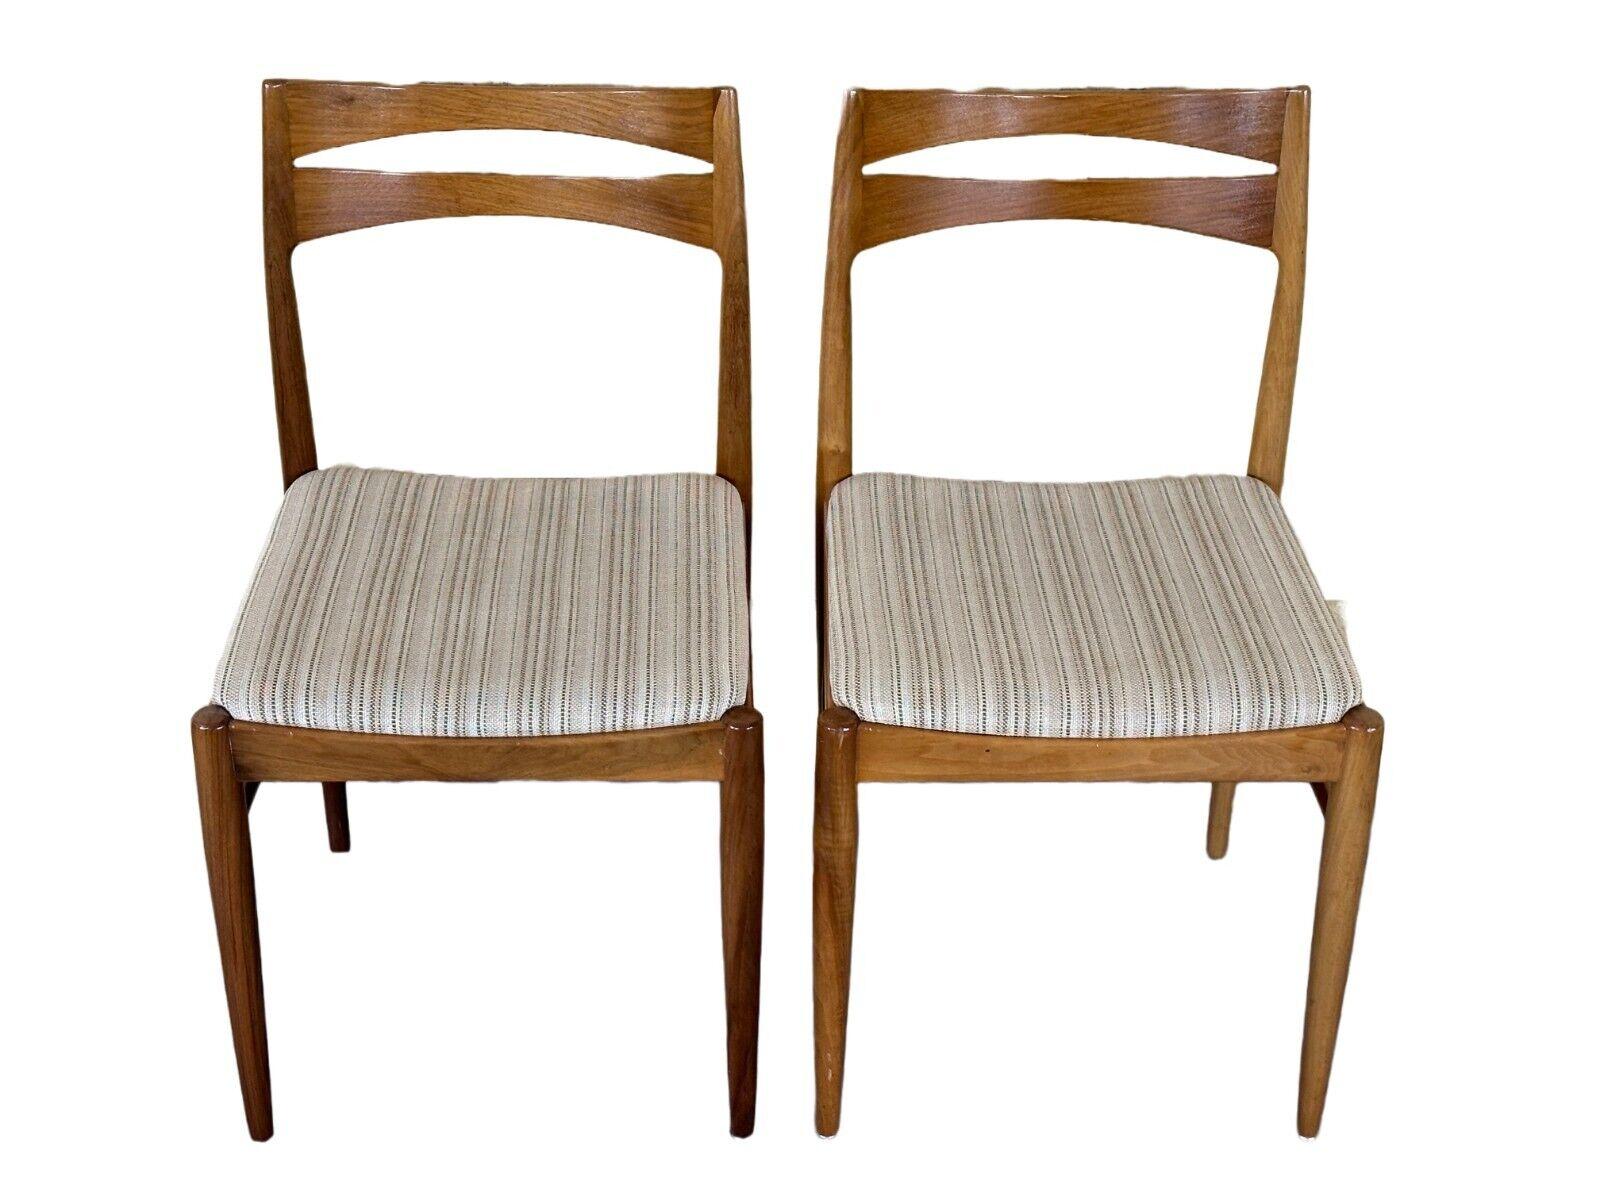 2x 60s 70s dining chair dining chair mid century Danish modern design

Object: 2x chair

Manufacturer:

Condition: good

Age: around 1960-1970

Dimensions:

Width = 46cm
Depth = 51.5cm
Height = 83cm
Seat height = 45cm

Other notes:

The pictures